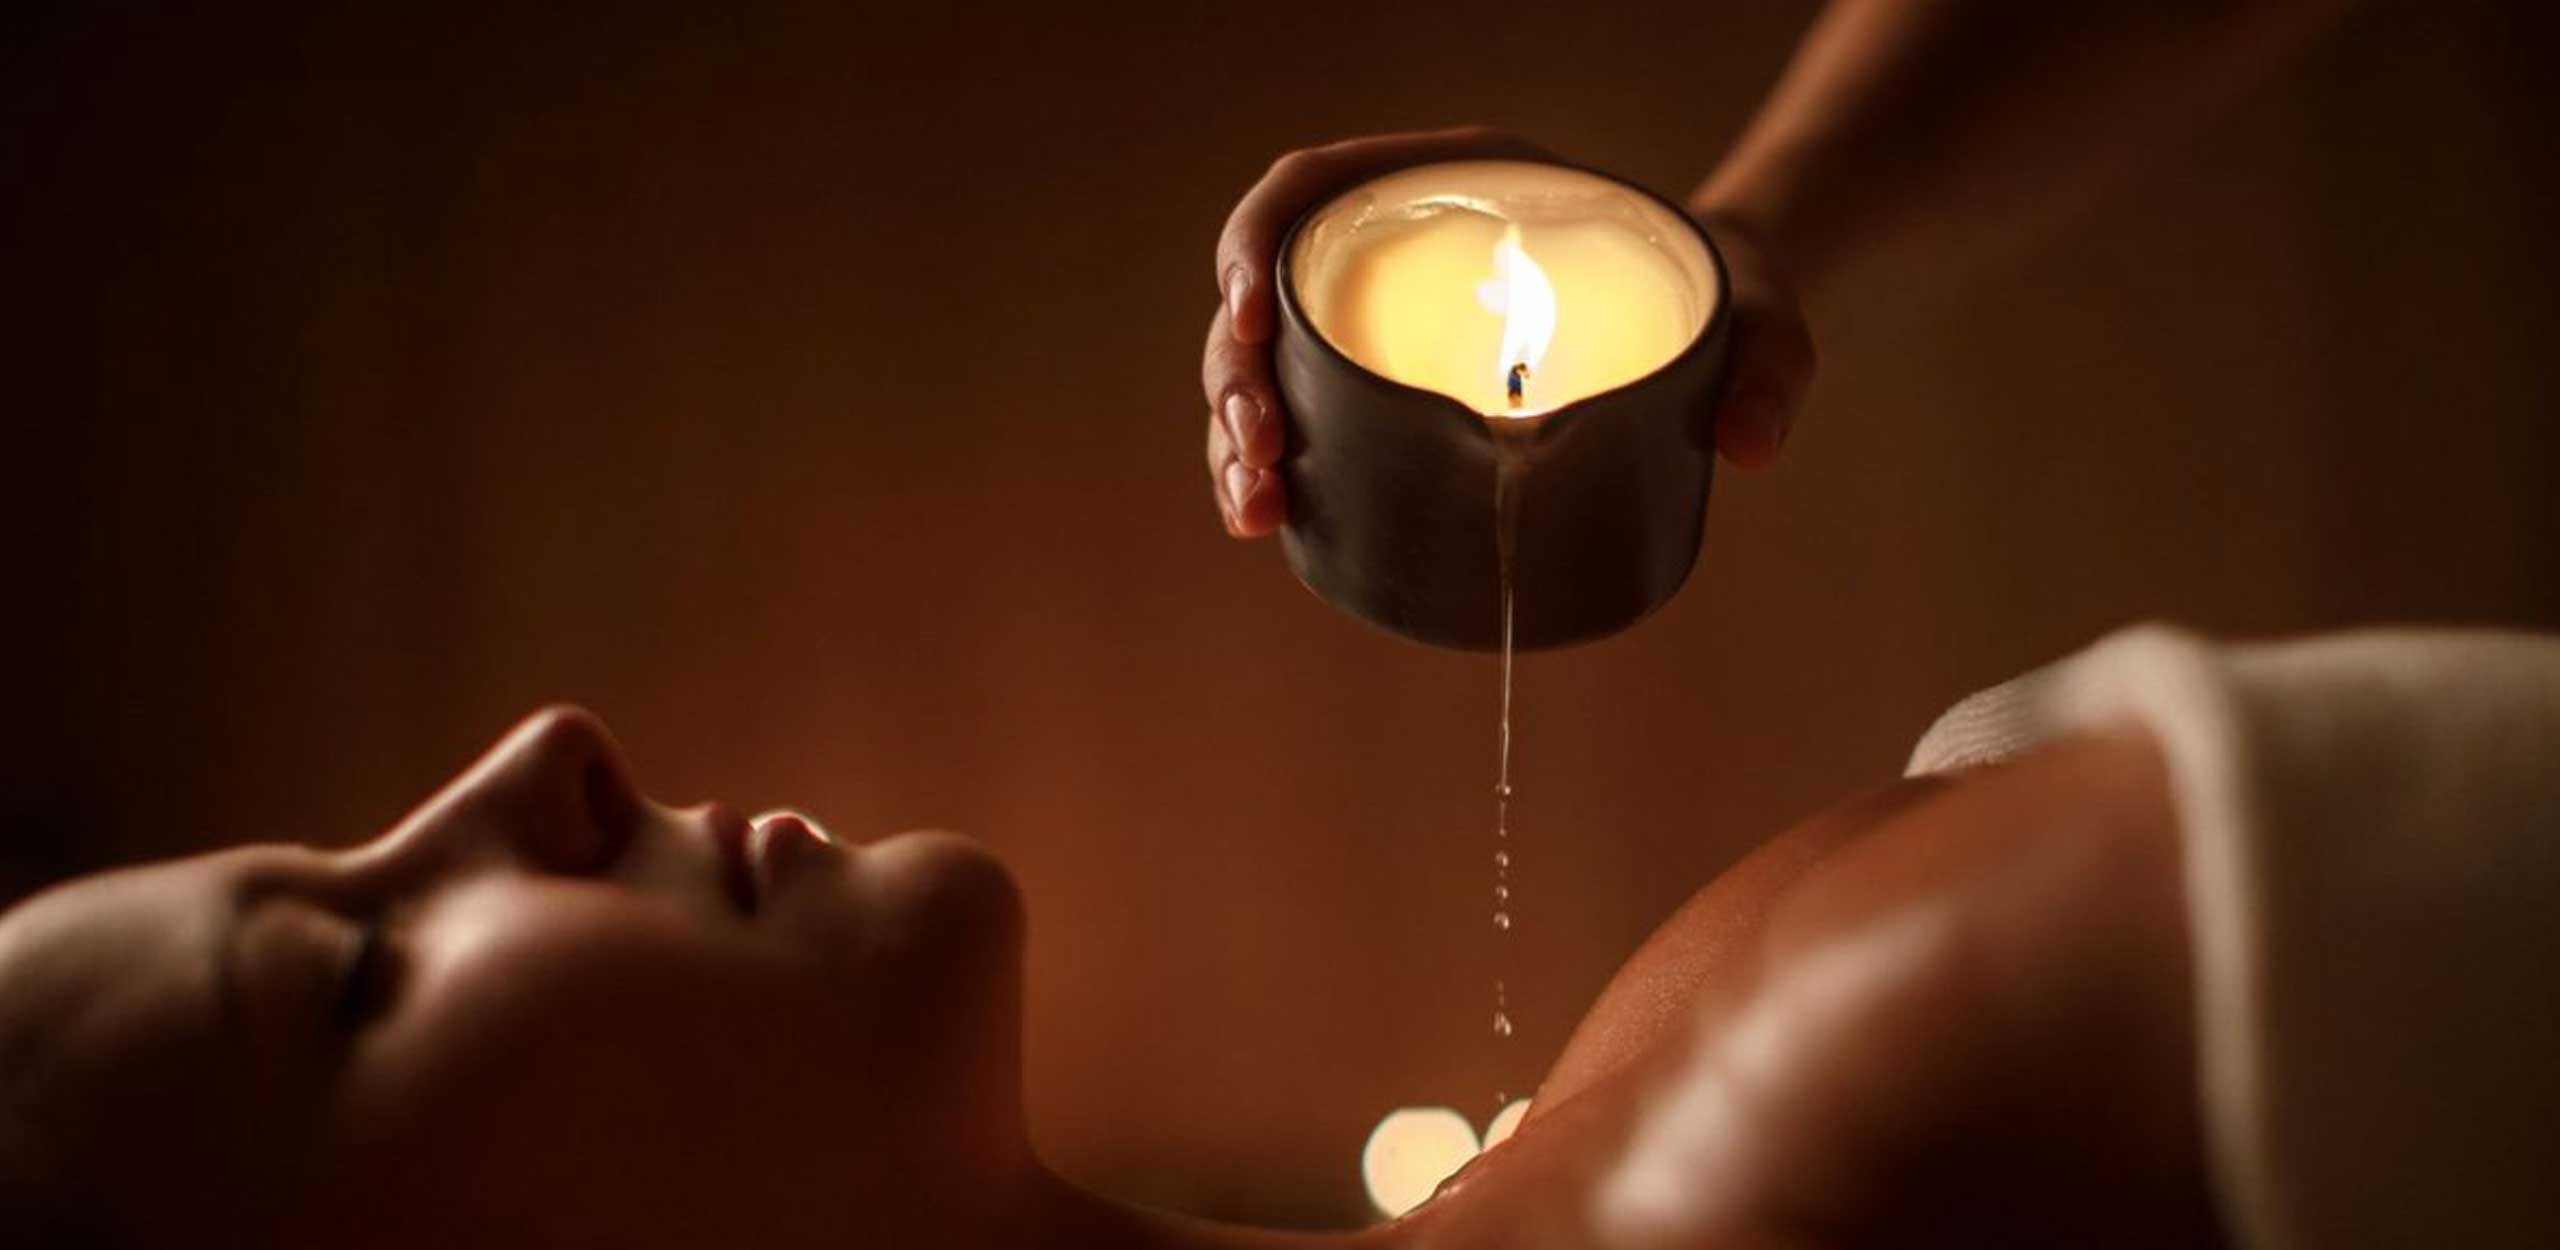 Massage Candles - How to Heat Things Up and Relax